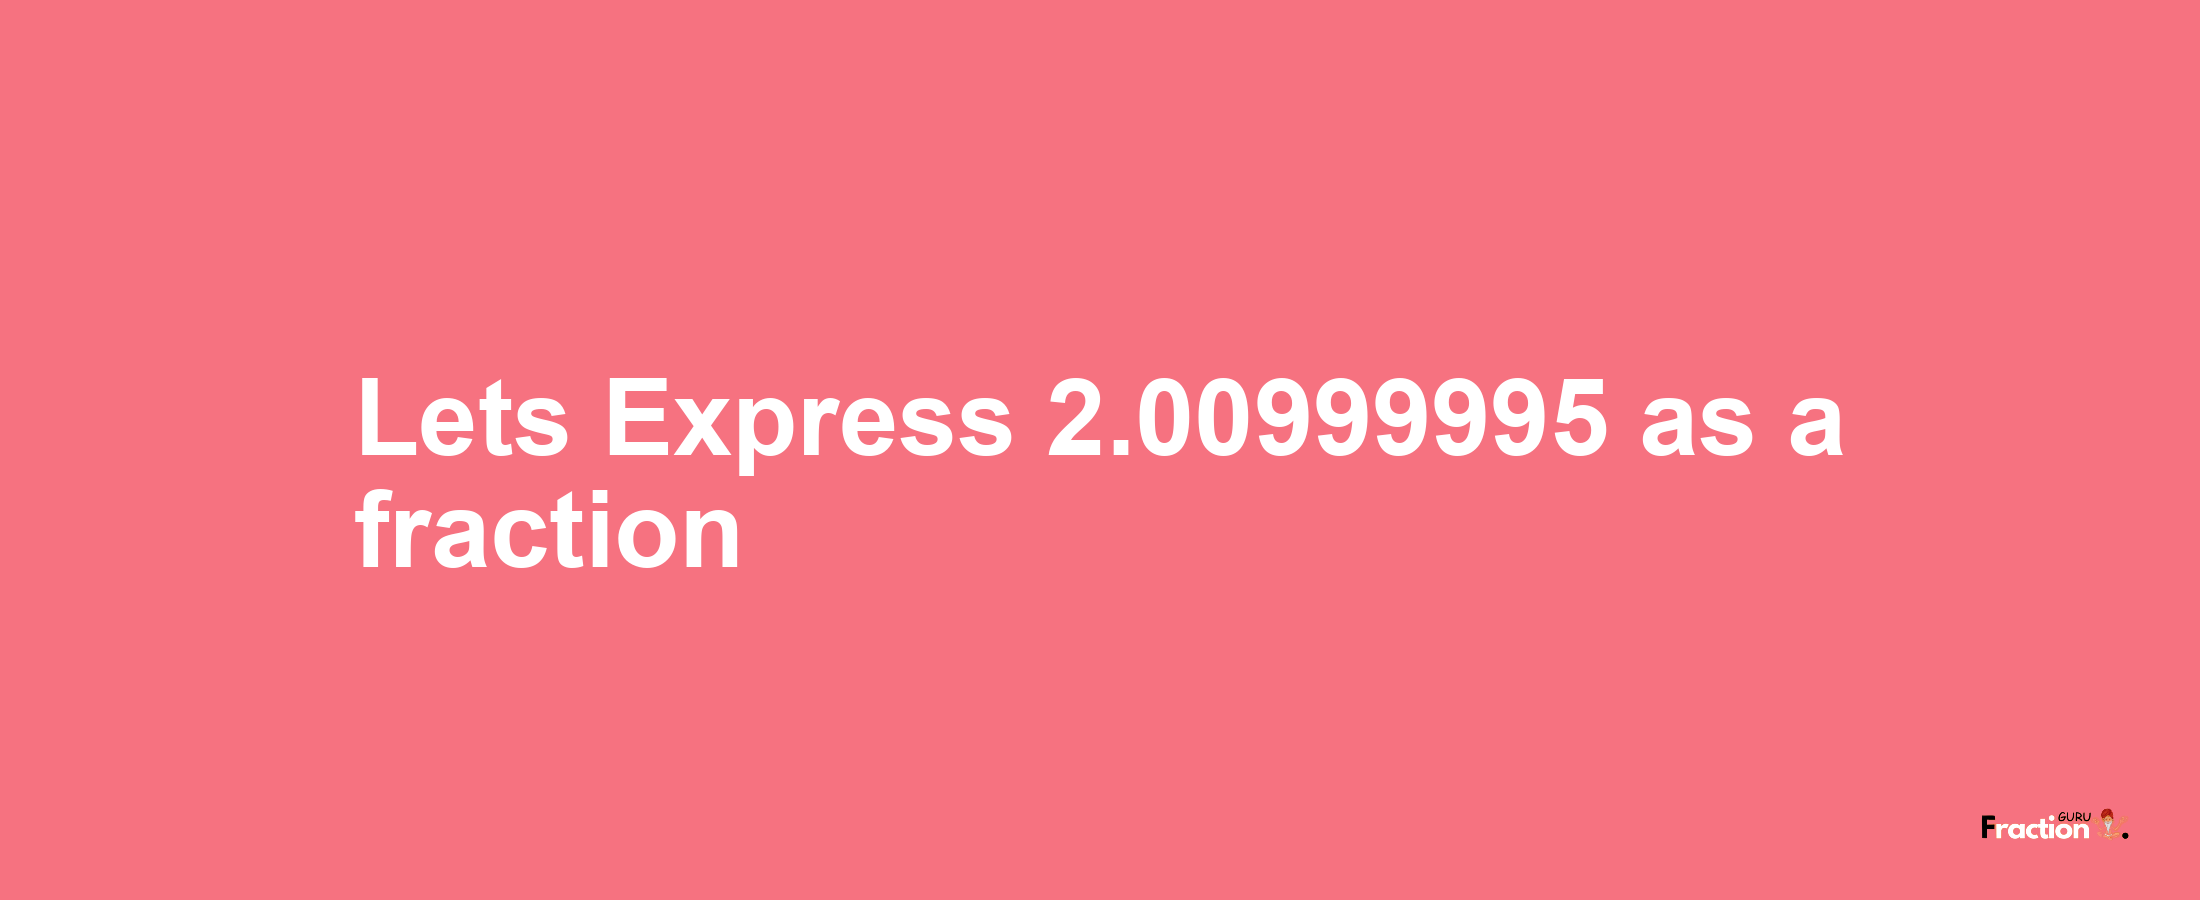 Lets Express 2.00999995 as afraction